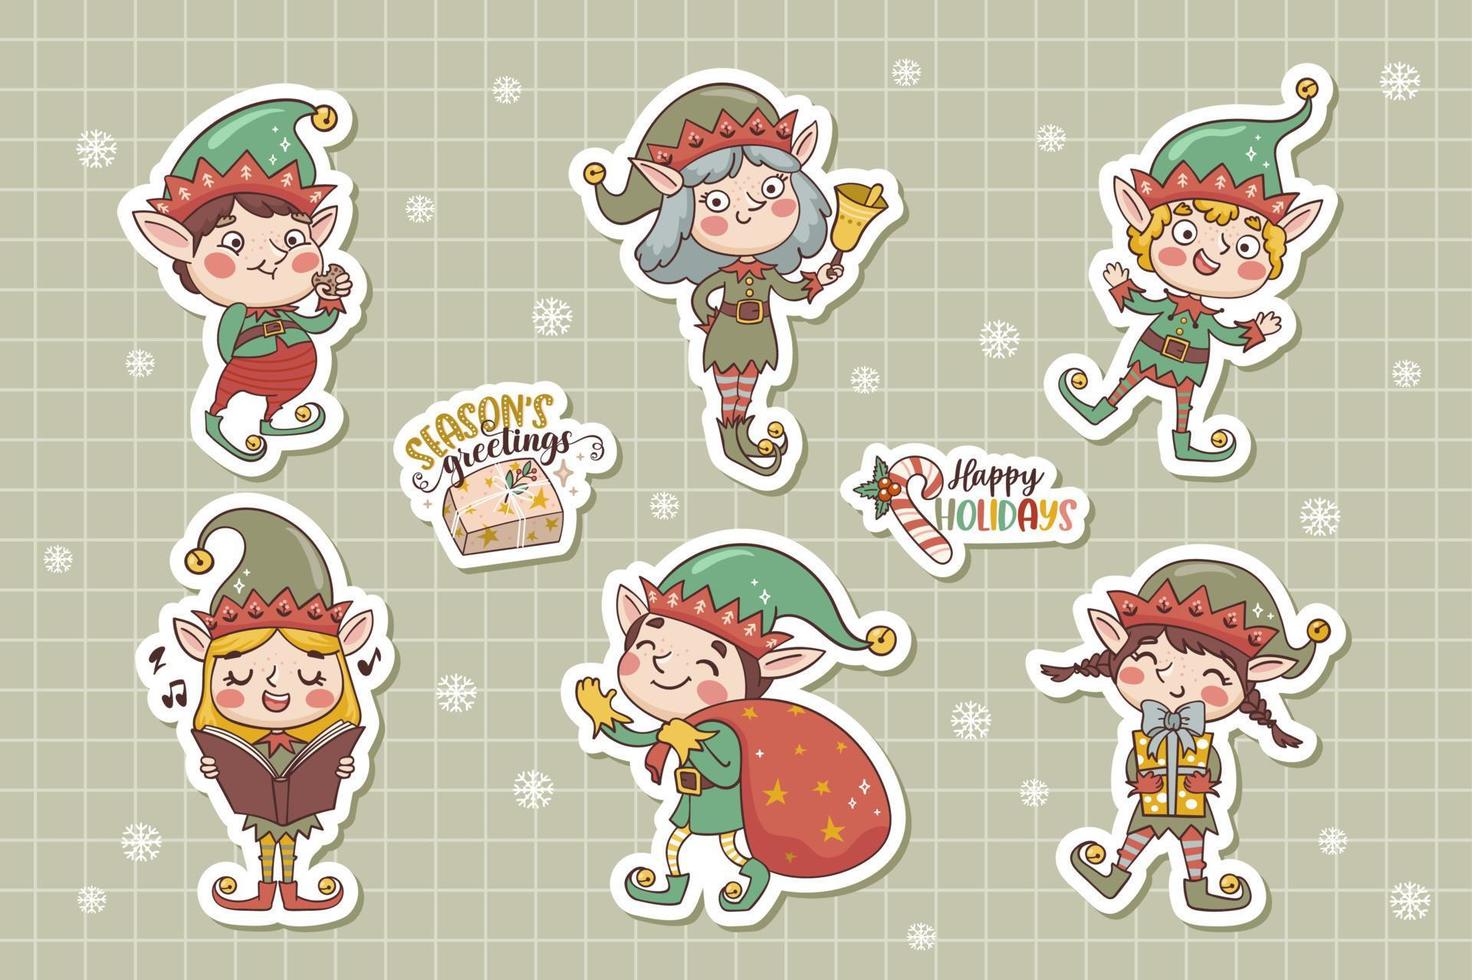 Christmas elves cartoon characters. Cute stickers collection in hand drawn style vector